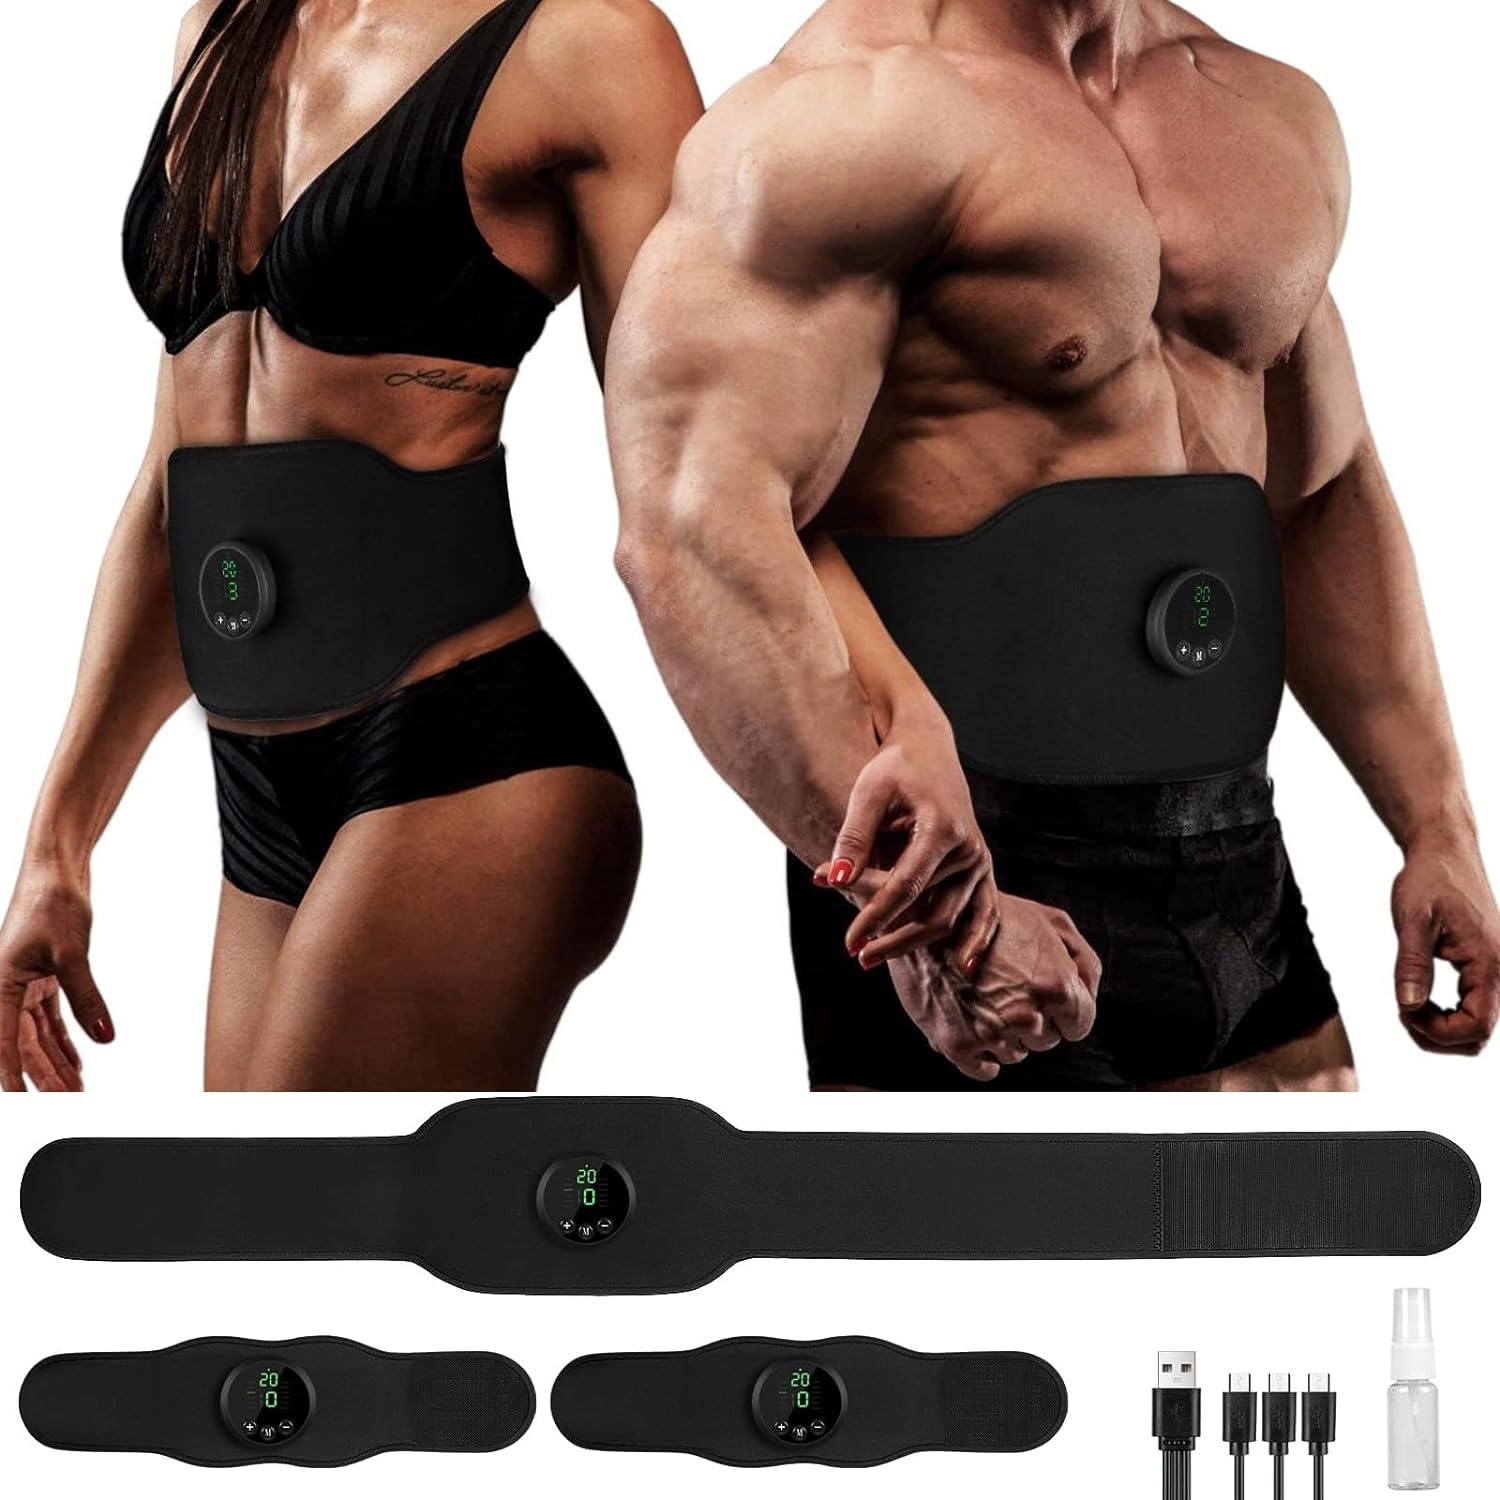 Ab Stimulator Muscle Toner – ABS and Arms Muscle Stimulator, All-in-one MHD TENS Portable Fitness Workout Equipment for Men and Women Neuropathy